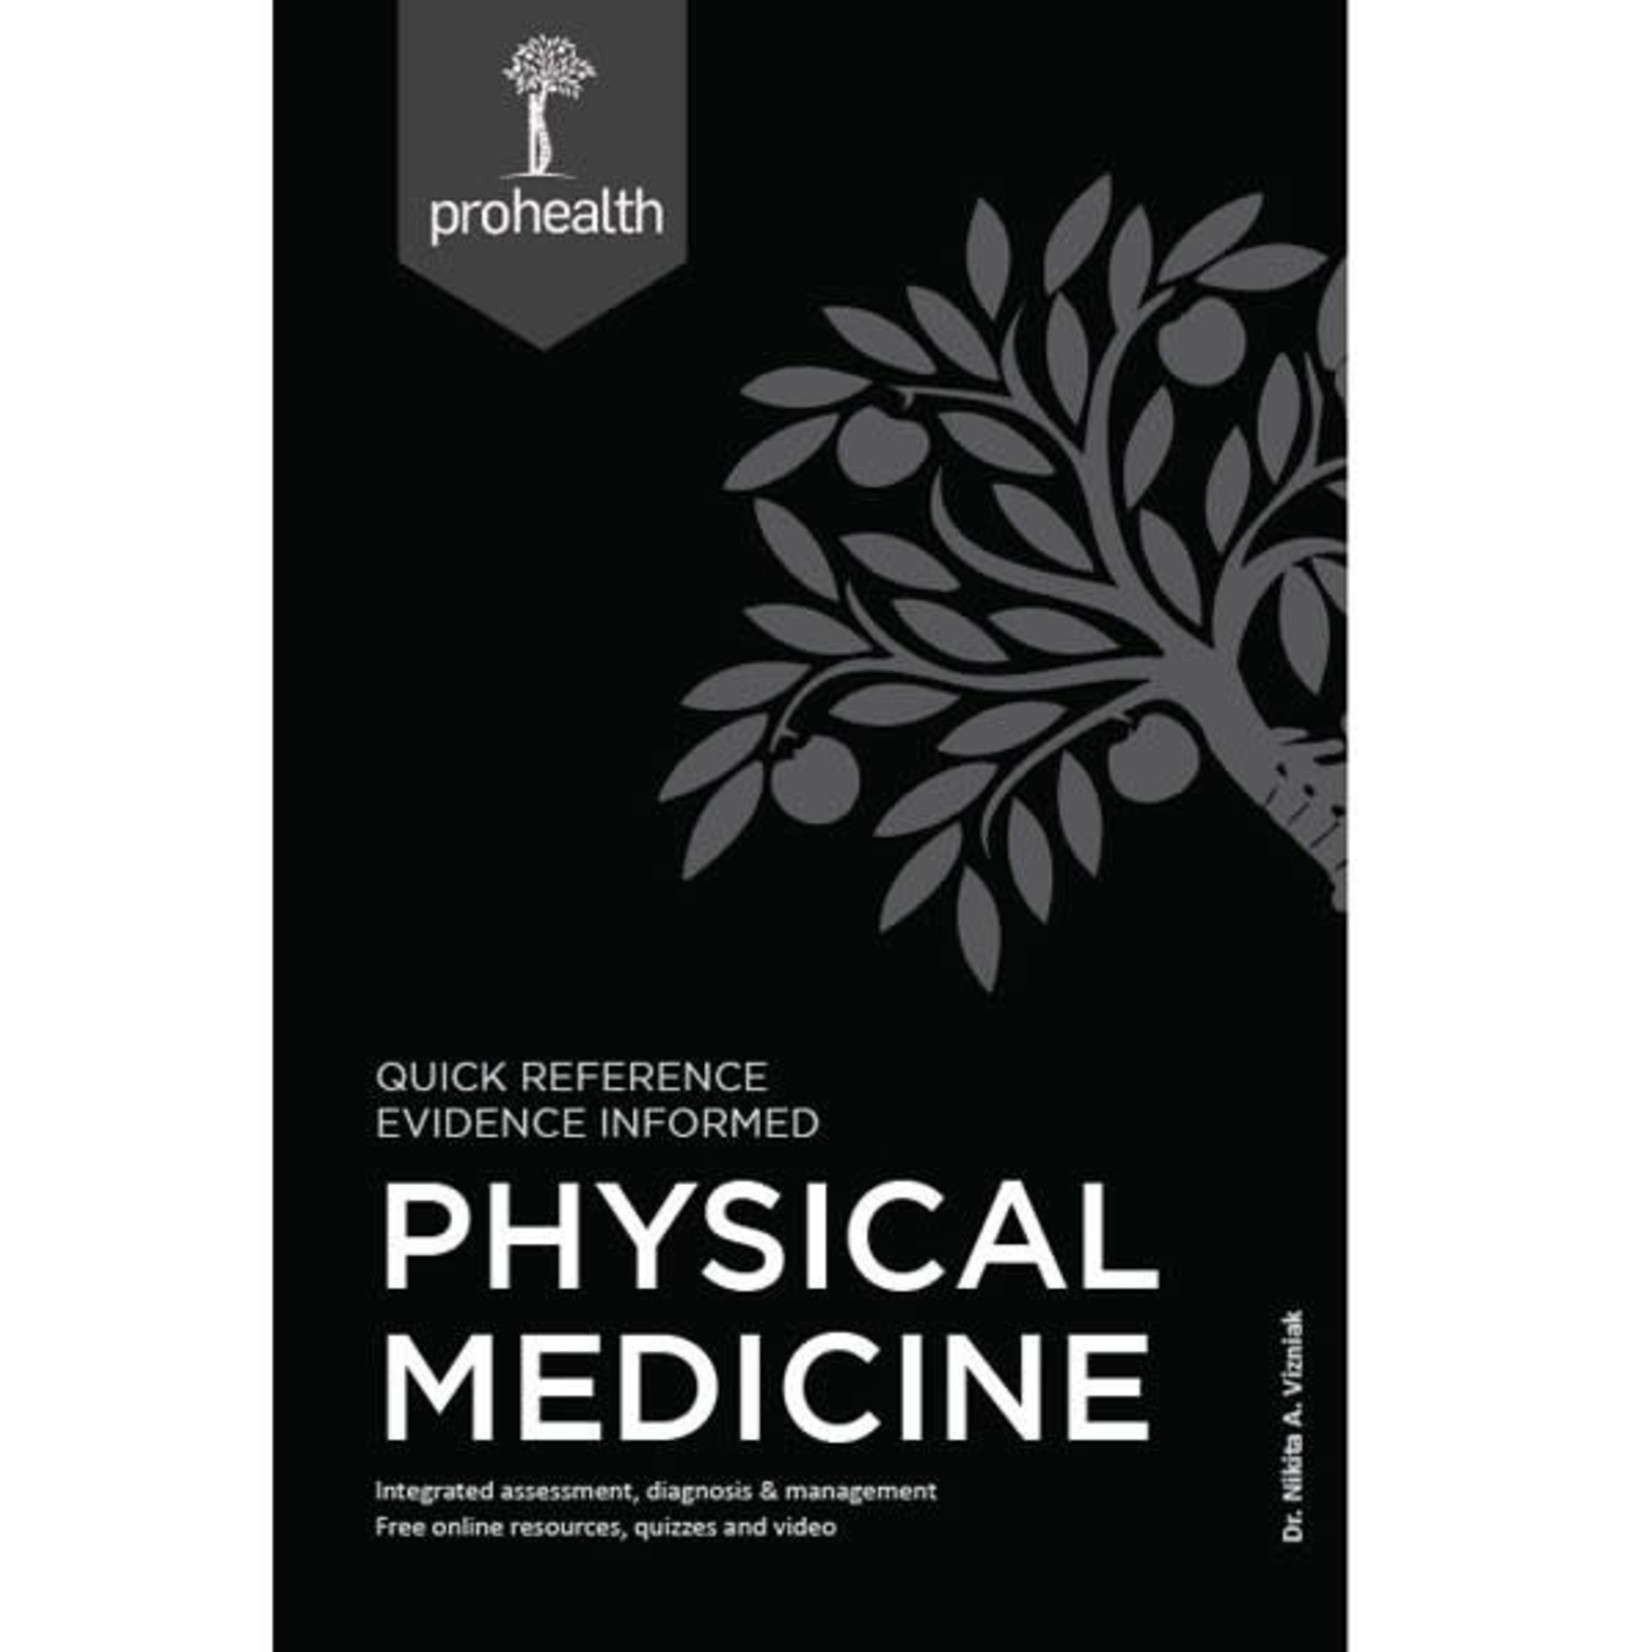 PROHEALTHSYS PROHEALTH PHYSICAL MEDICINE